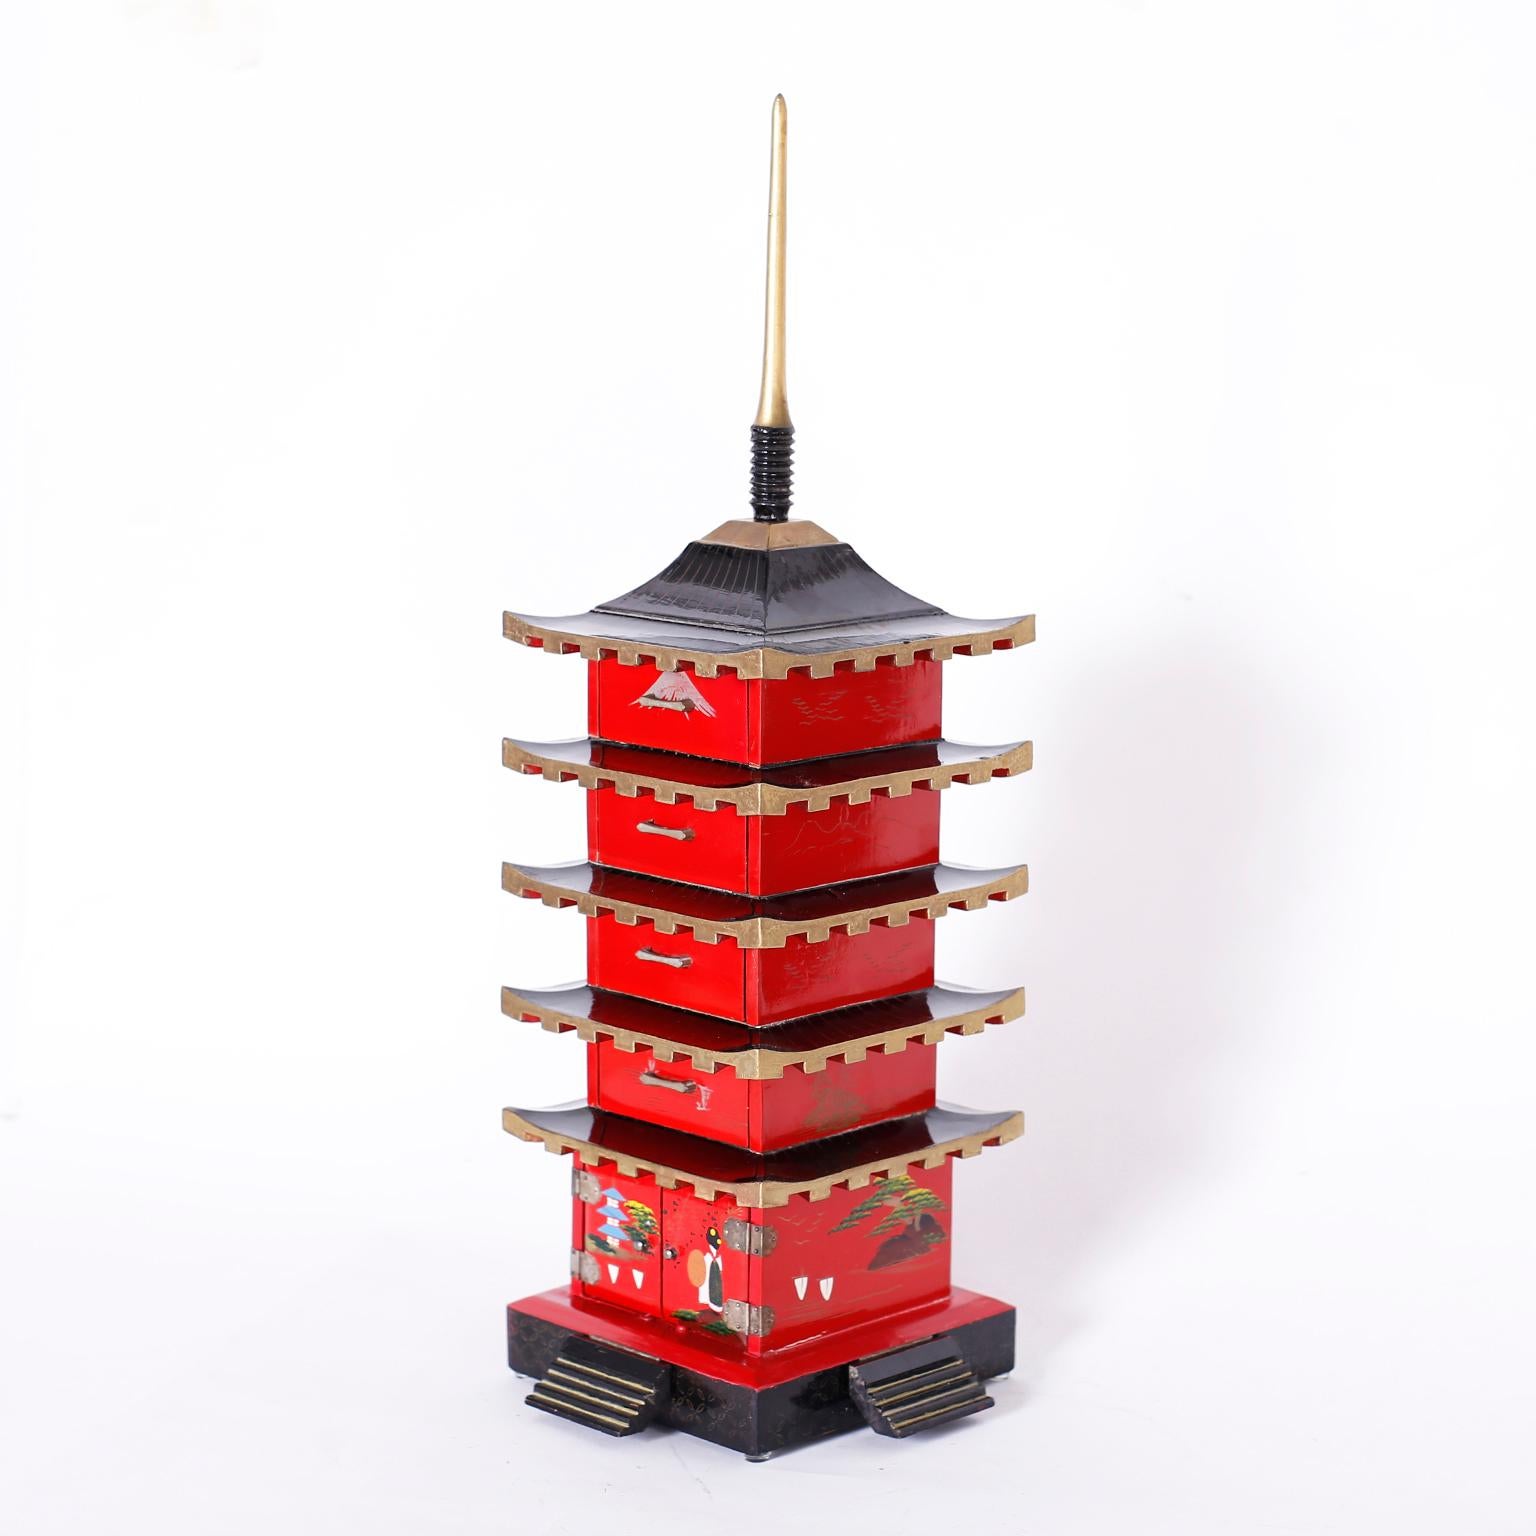 Japanese jewelry box constructed with wood in a pagoda or temple form with five drawers, lacquered in red and black, and decorated with stylized cultural lore.